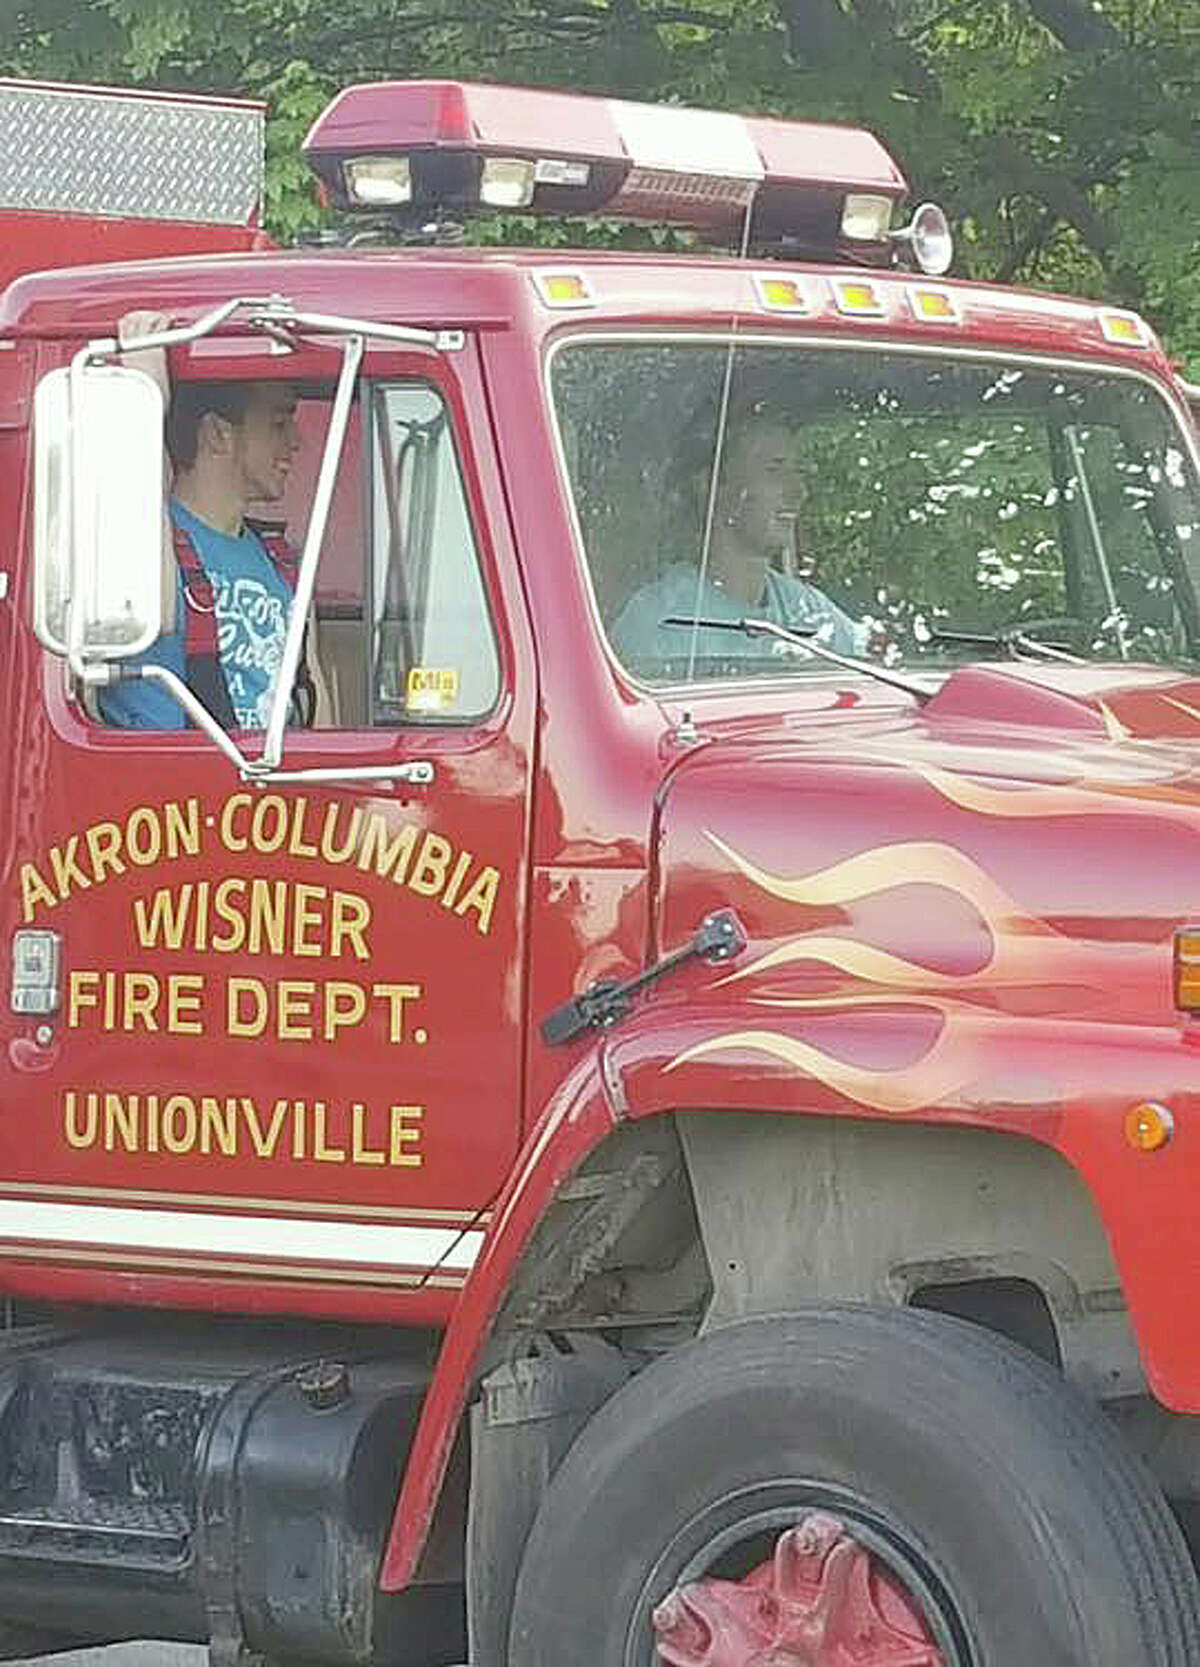   The Unionville-ACW Fire Department made a special delivery to help cover expenses for well-known area law enforcement officer Steven Repkie, who is battling cancer. 